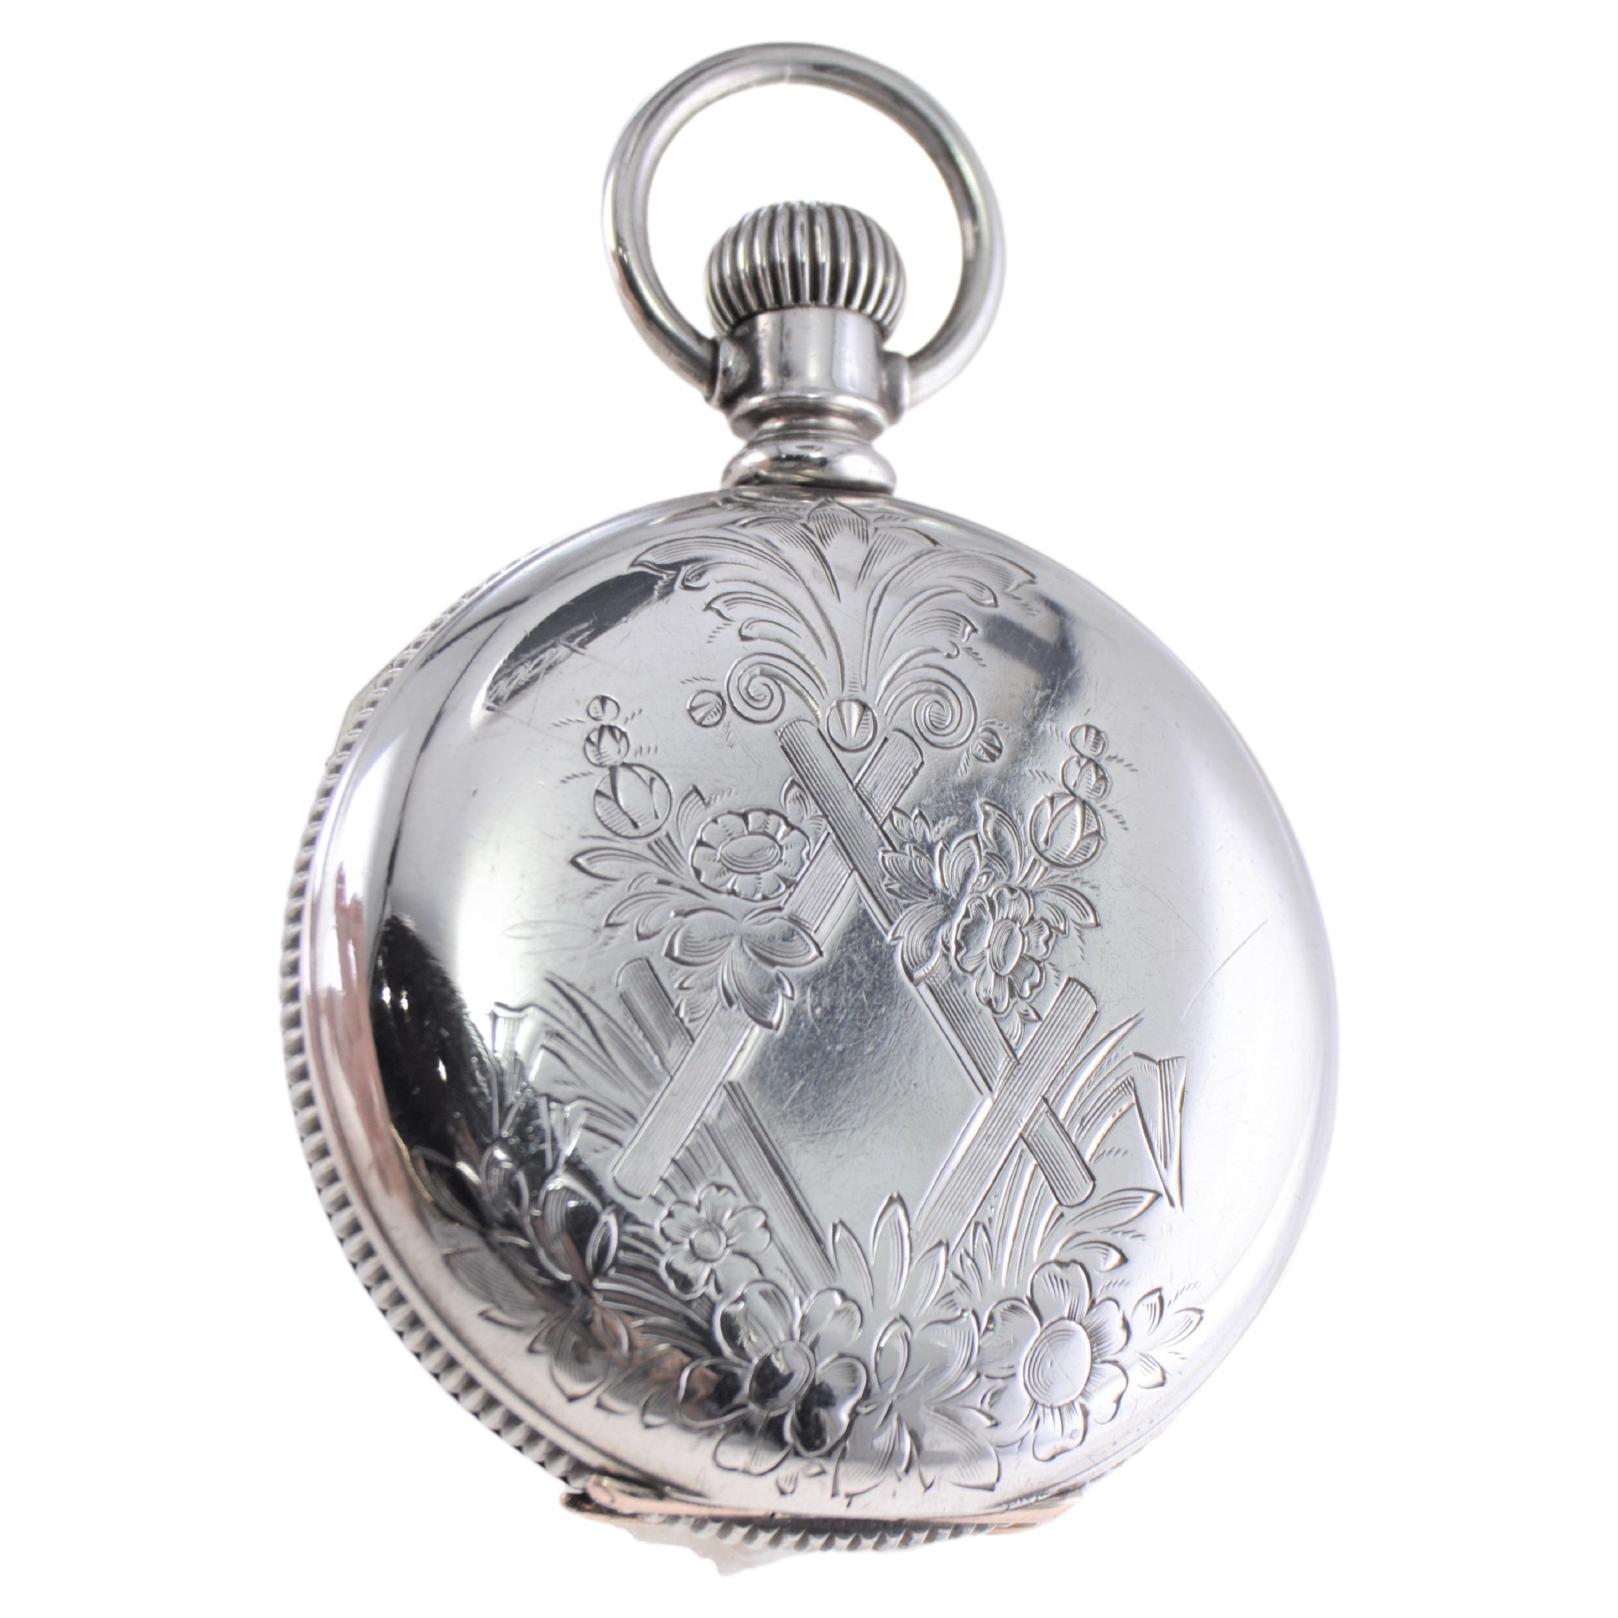 Illinois Silver Hunters Case Pocket Watch from 1893 with Pocket Watch Chain  5